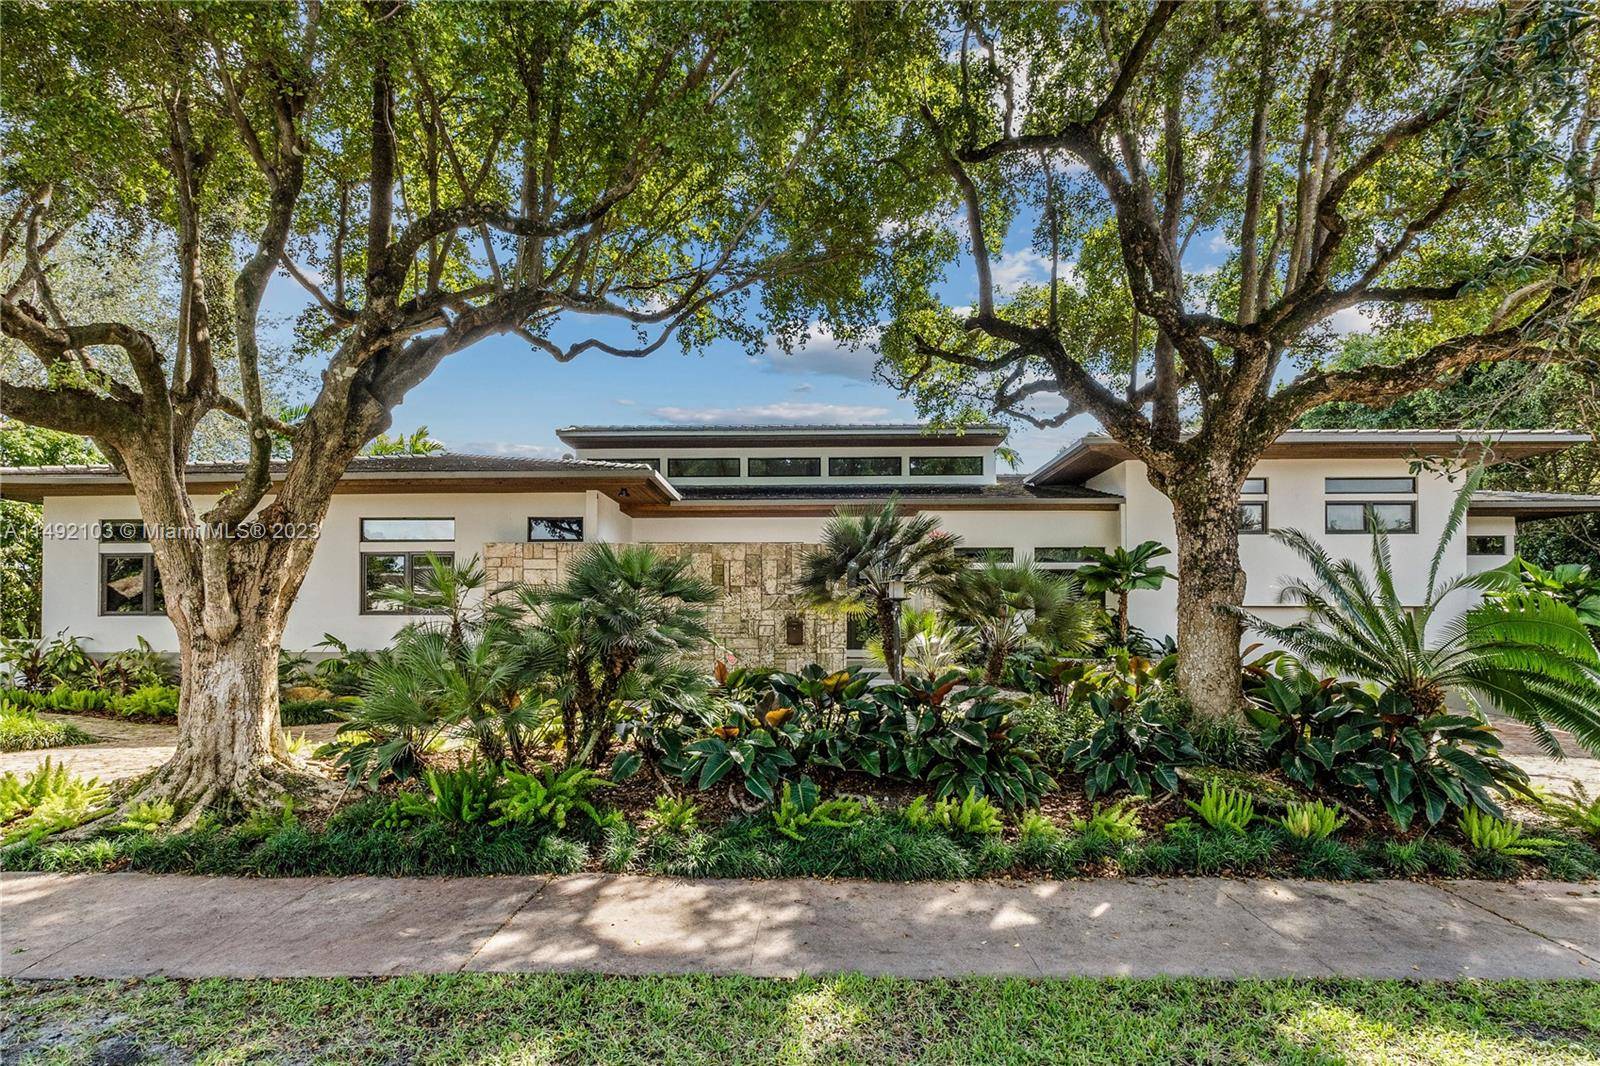 New waterfront custom home with 135 on Gables waterway in Coral Gables.